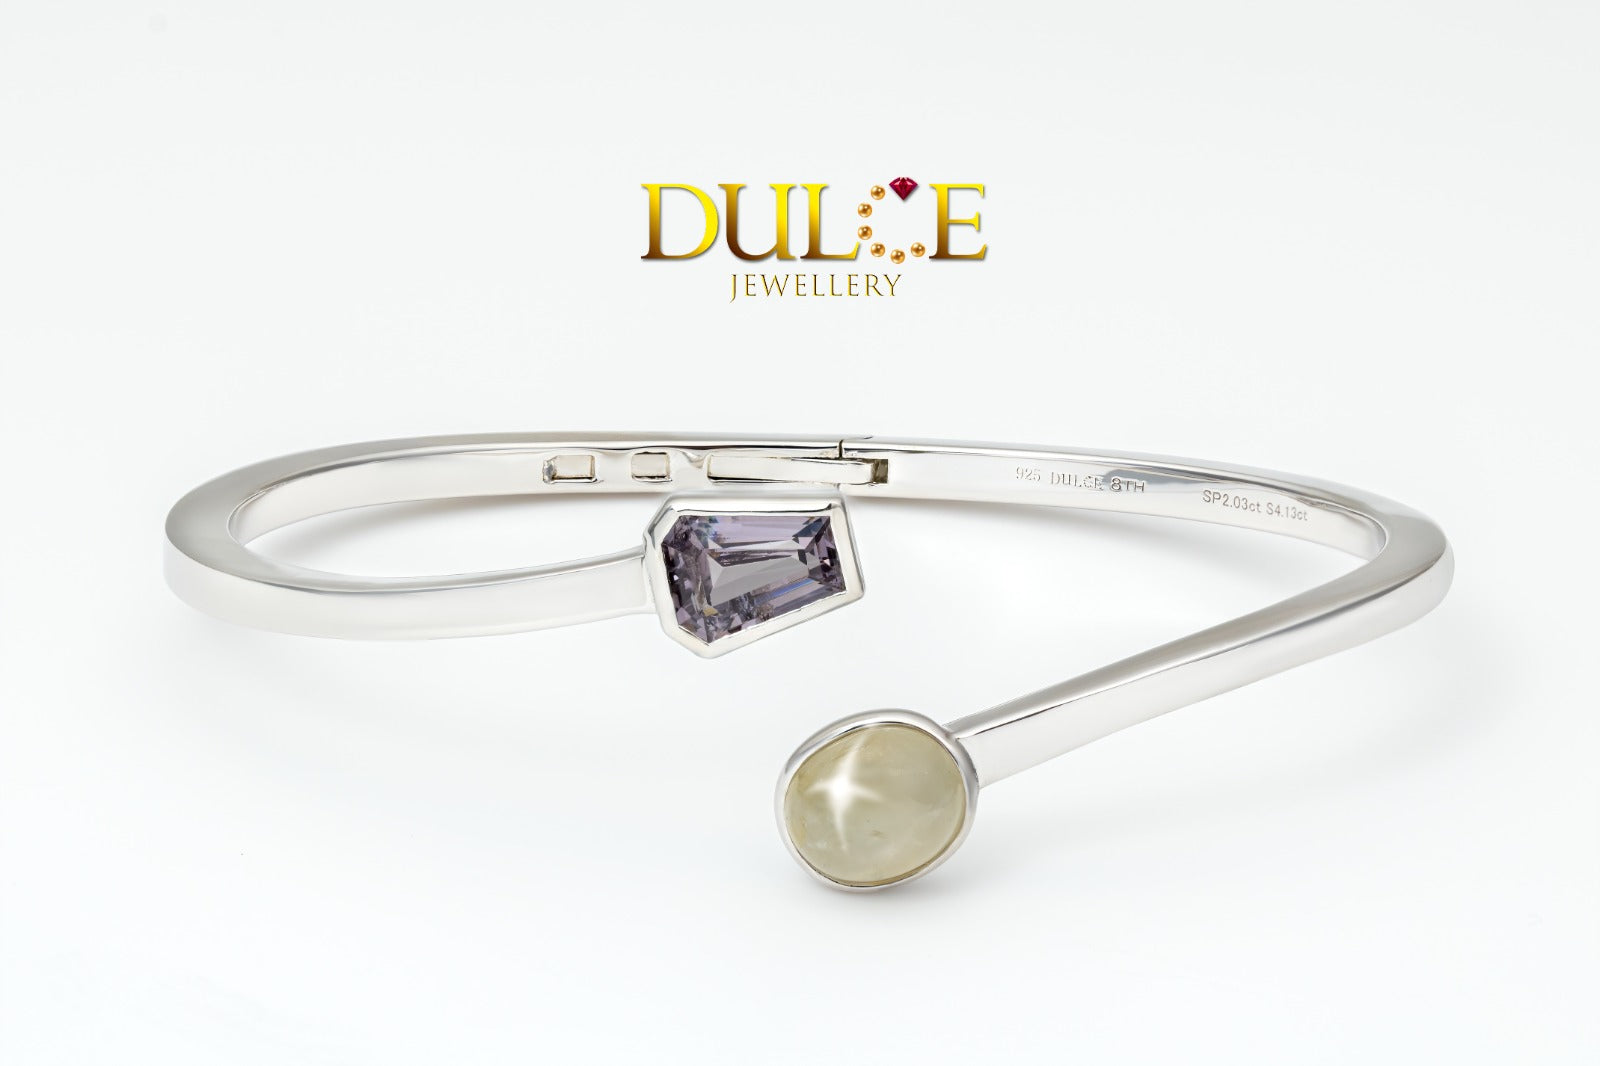 dulce jewellery, spinel bangle, star sapphire bangle, silver bangle, fashion jewellery, daily bangle, gift for her